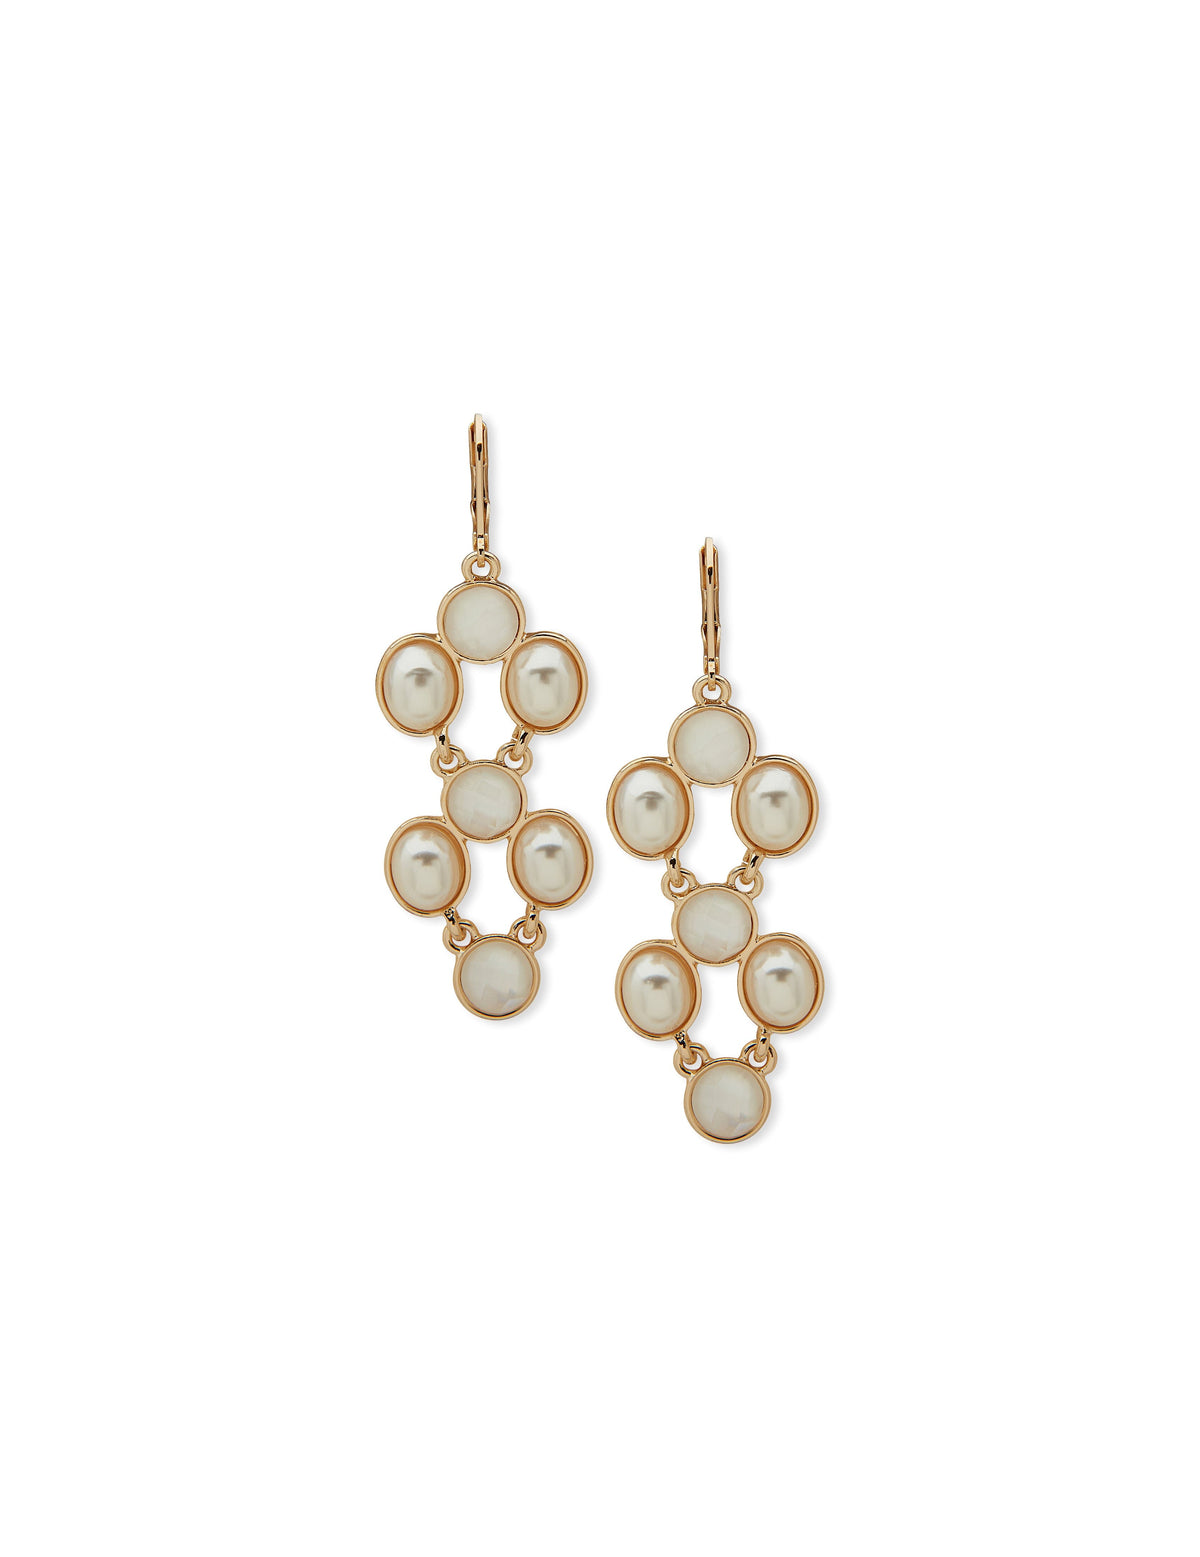 Anne Klein Gold Tone Drama Drop Mother of Pearl Earrings